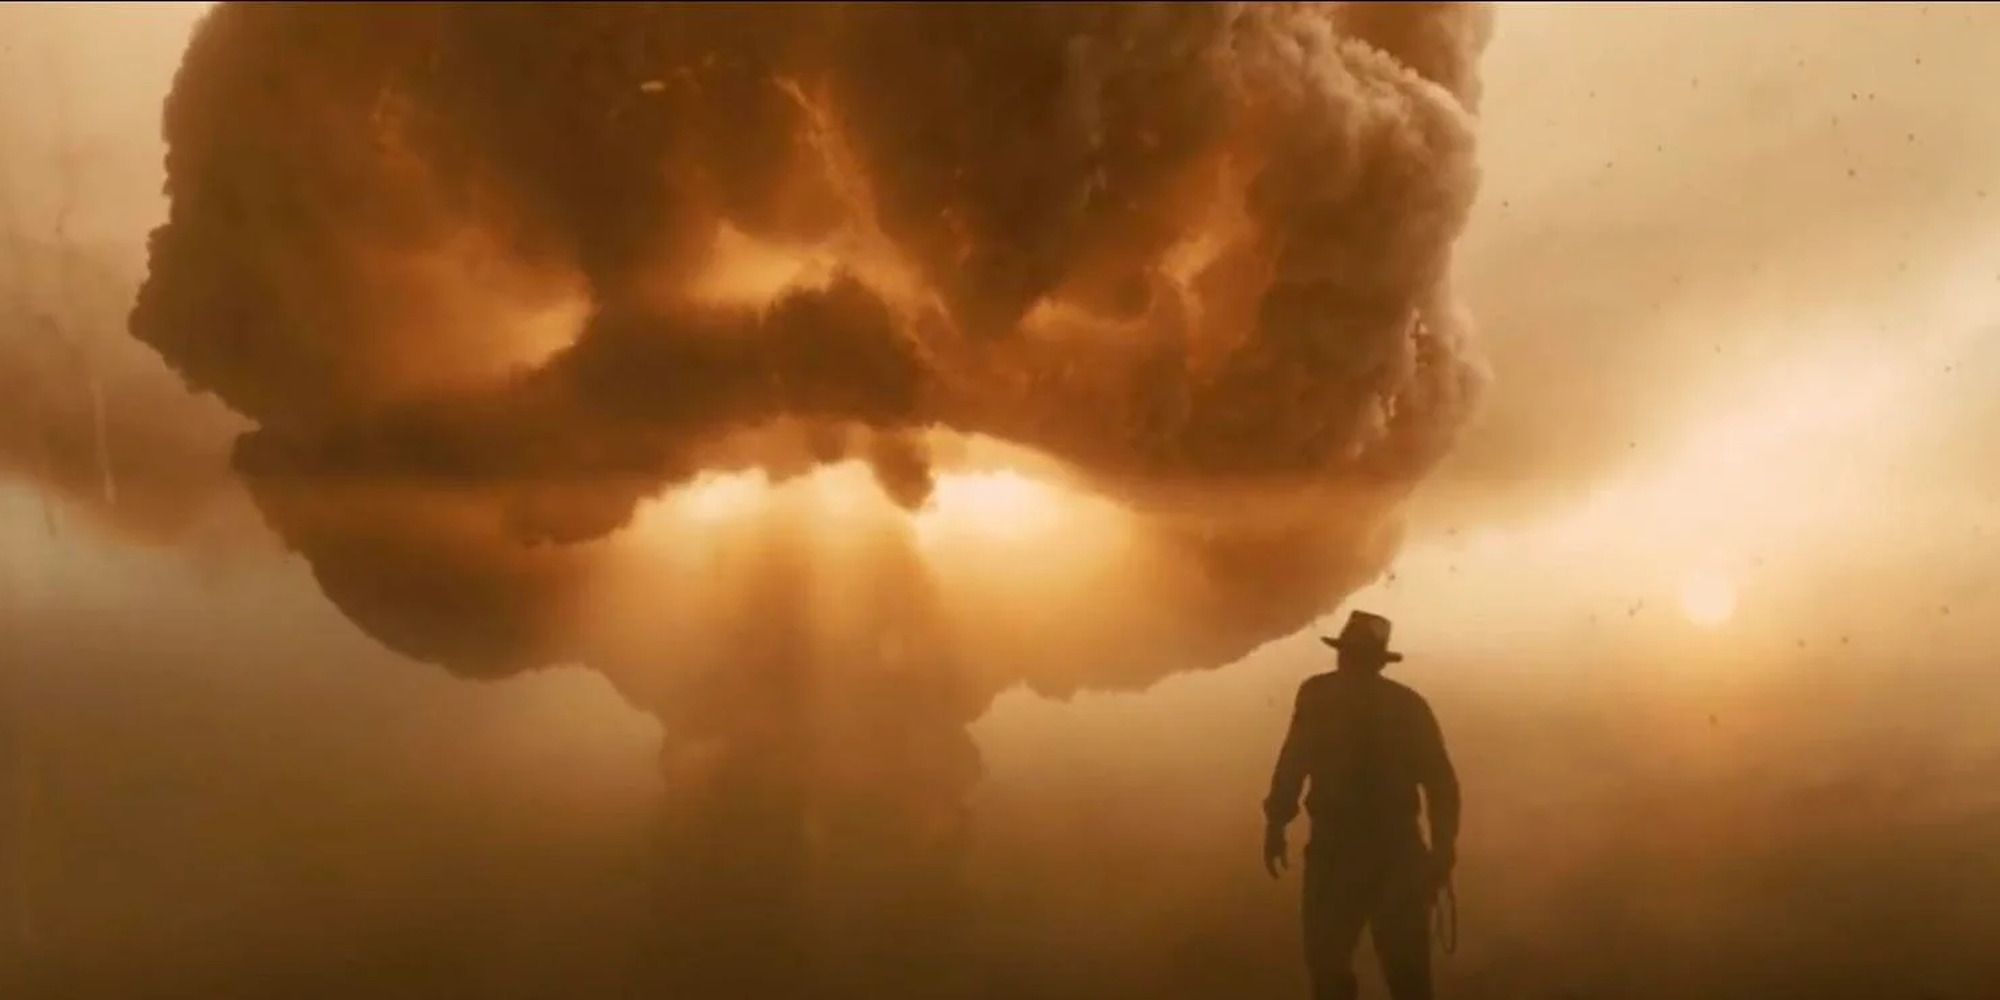 Indiana Jones in 'Kingdom of the Crystal Skull' standing in front of a nuclear explosion